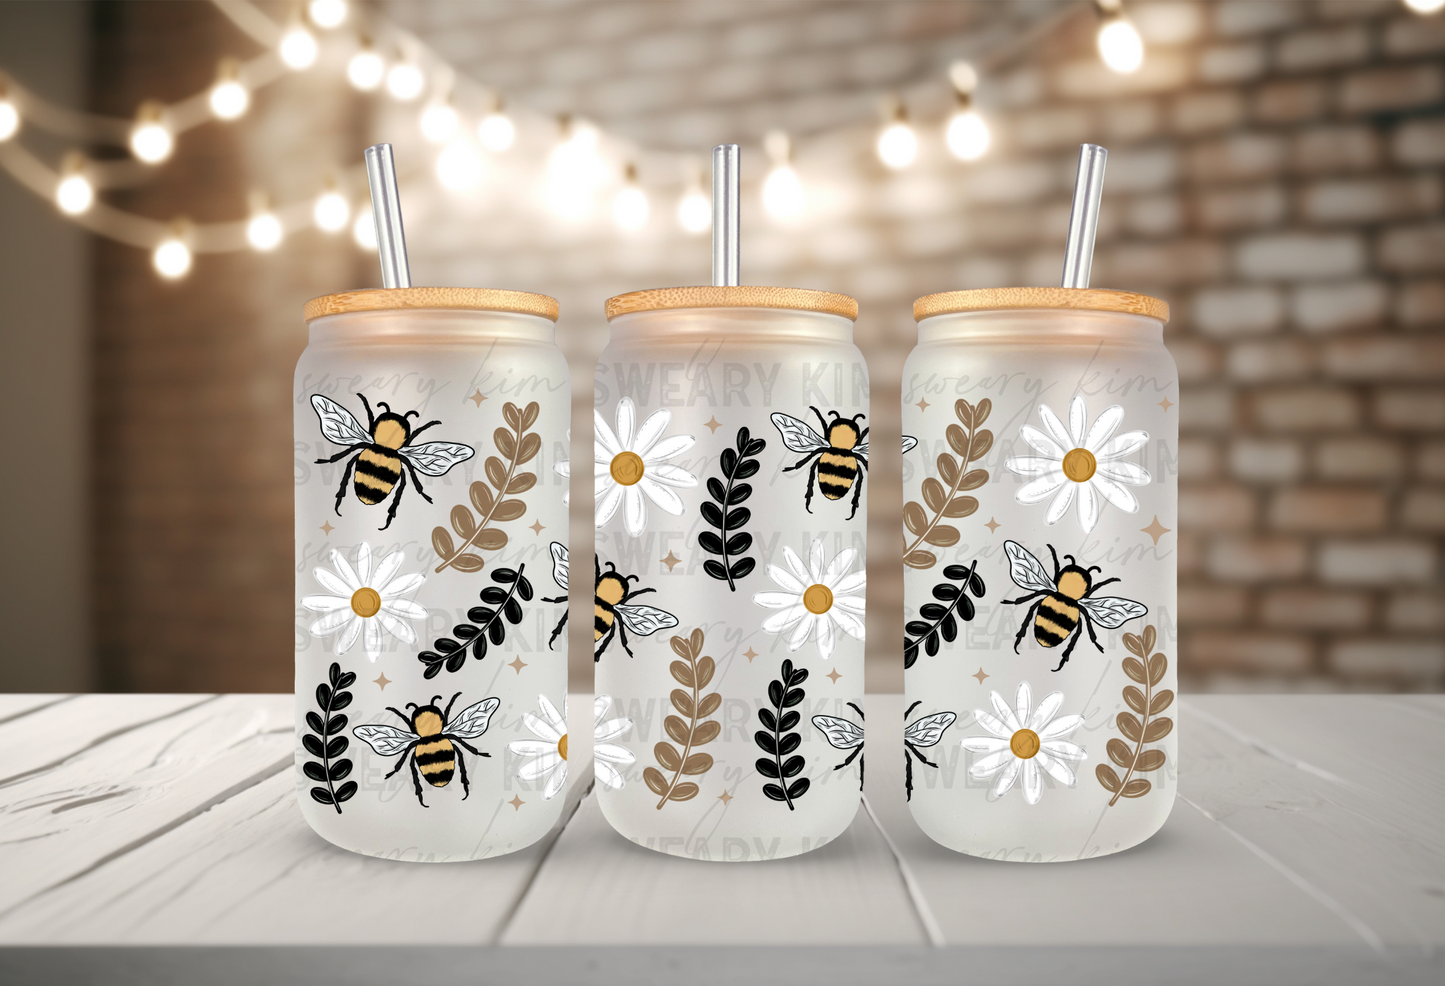 Bee's & Daisy's UV Dtf 16oz glass can wrap